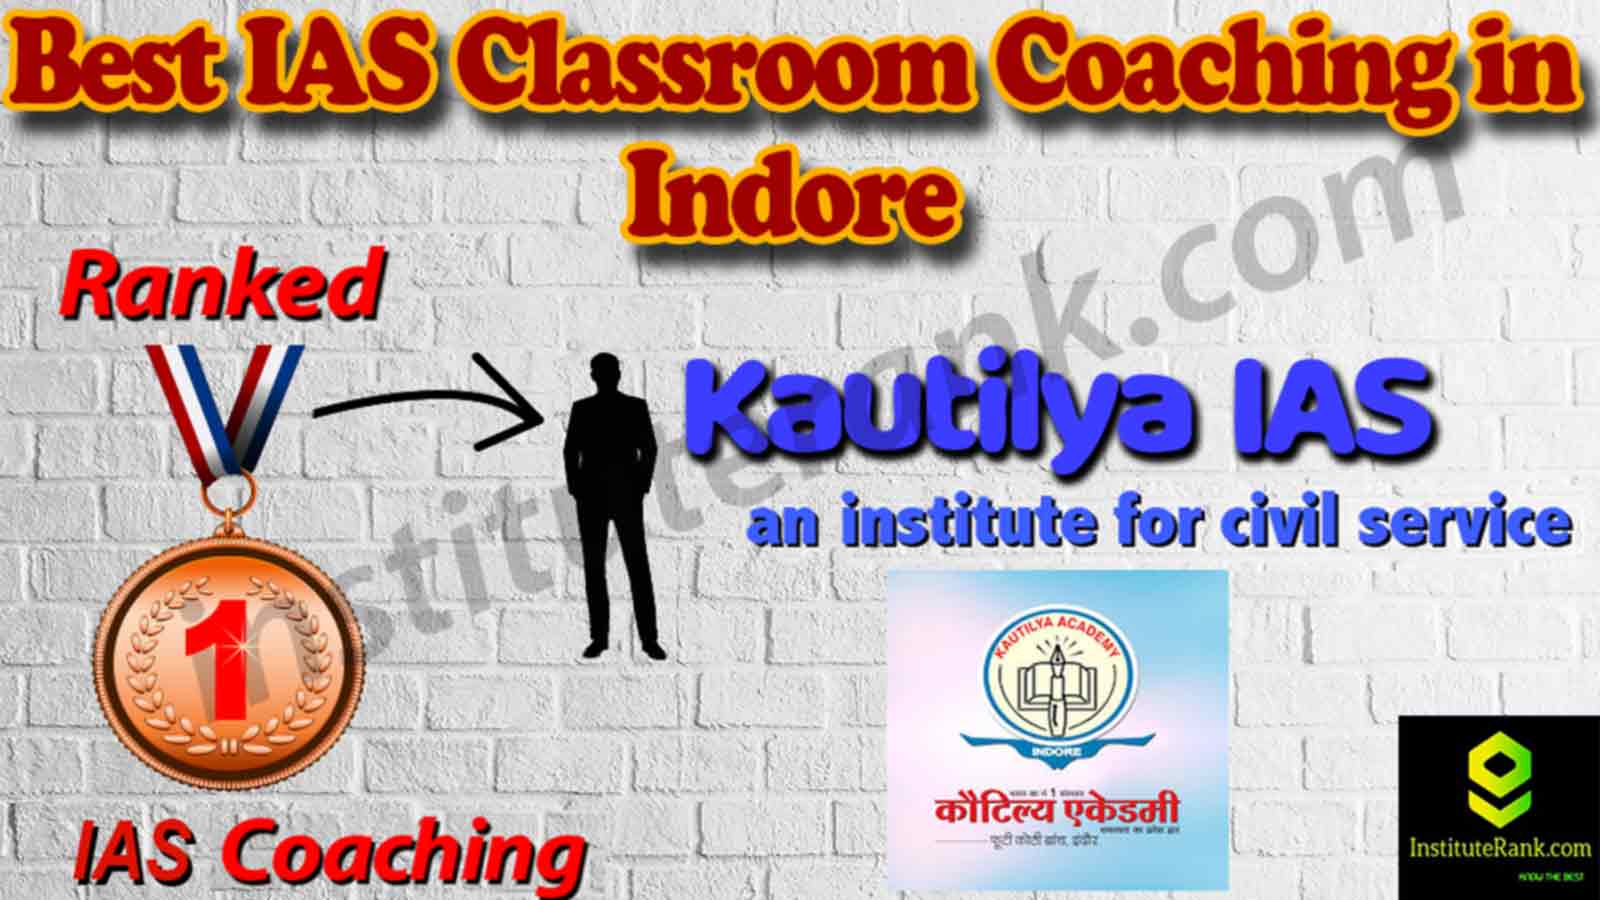 Best IAS Coaching and fees in Indore